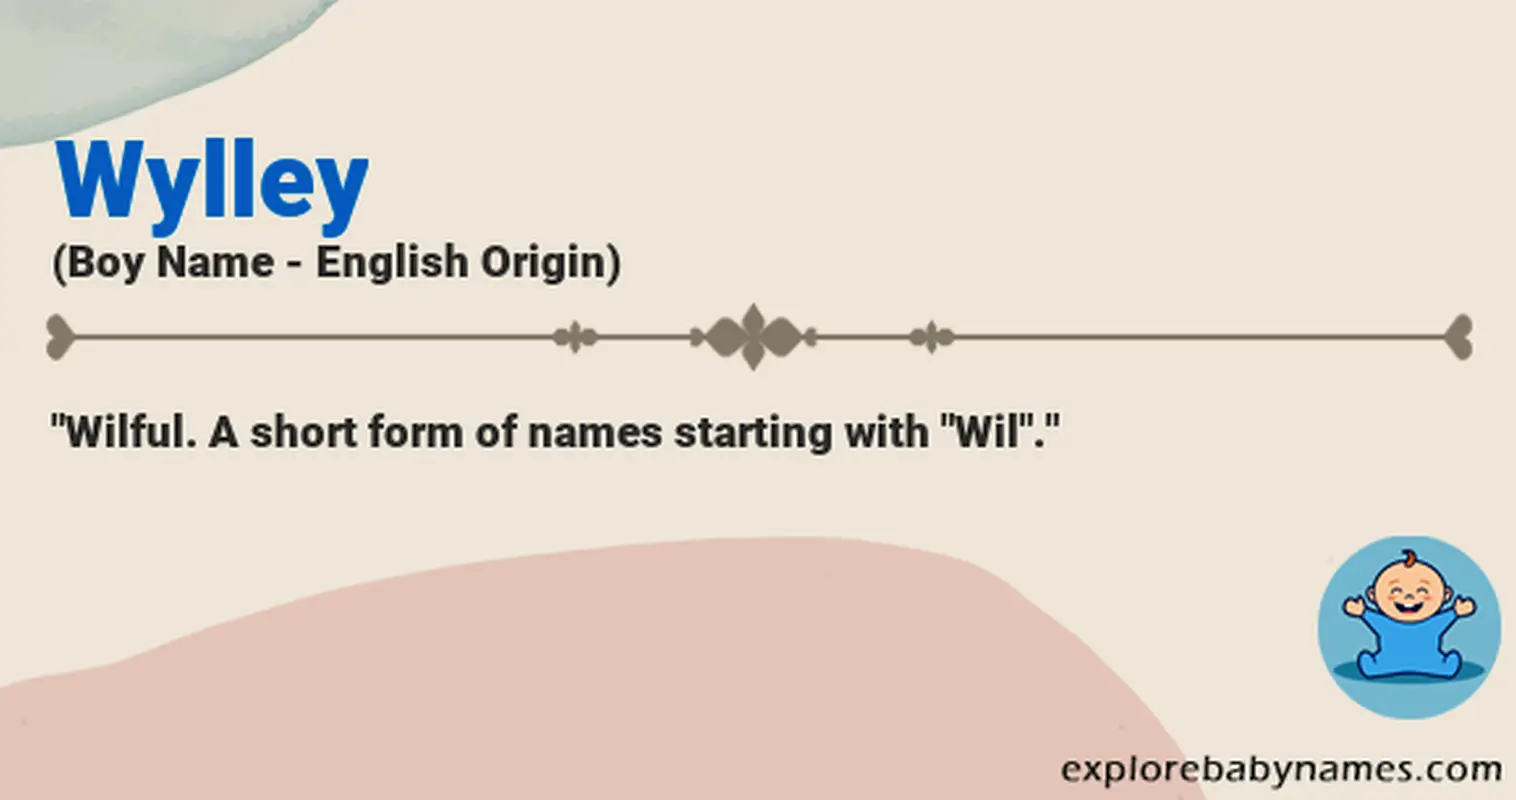 Meaning of Wylley